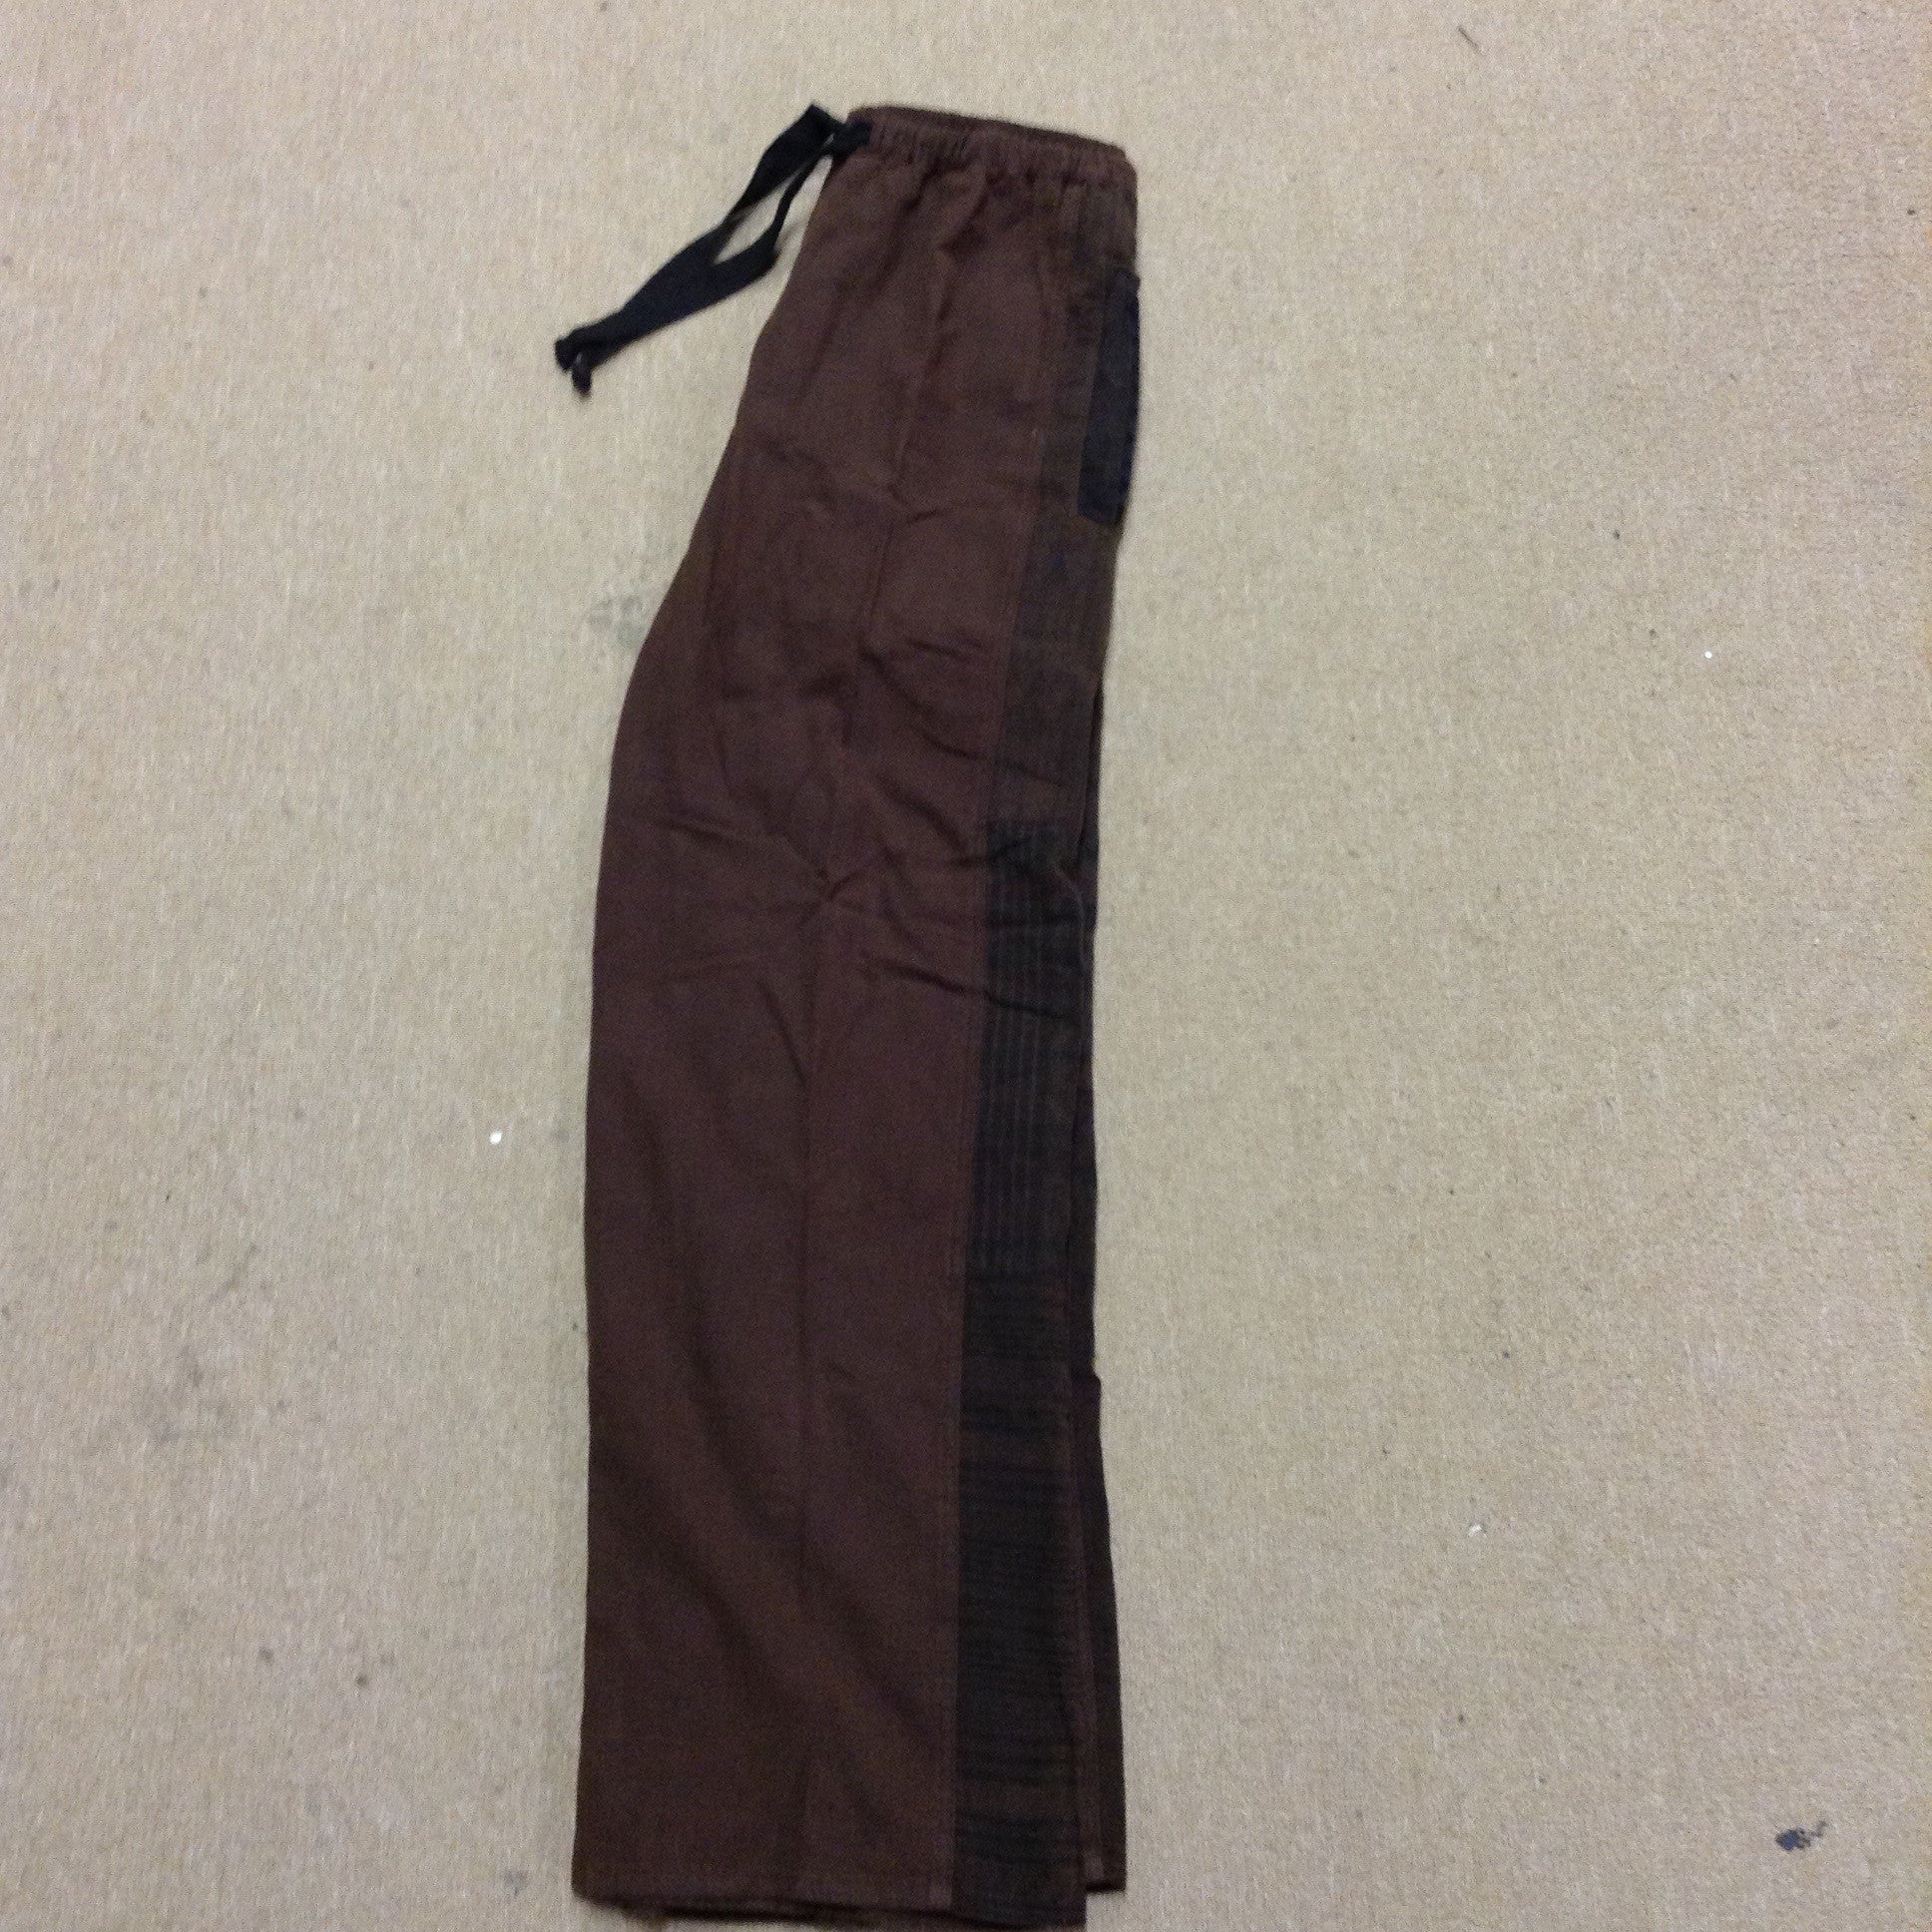 Dyed Pants With Handwoven Accents - HalfMoonMusic